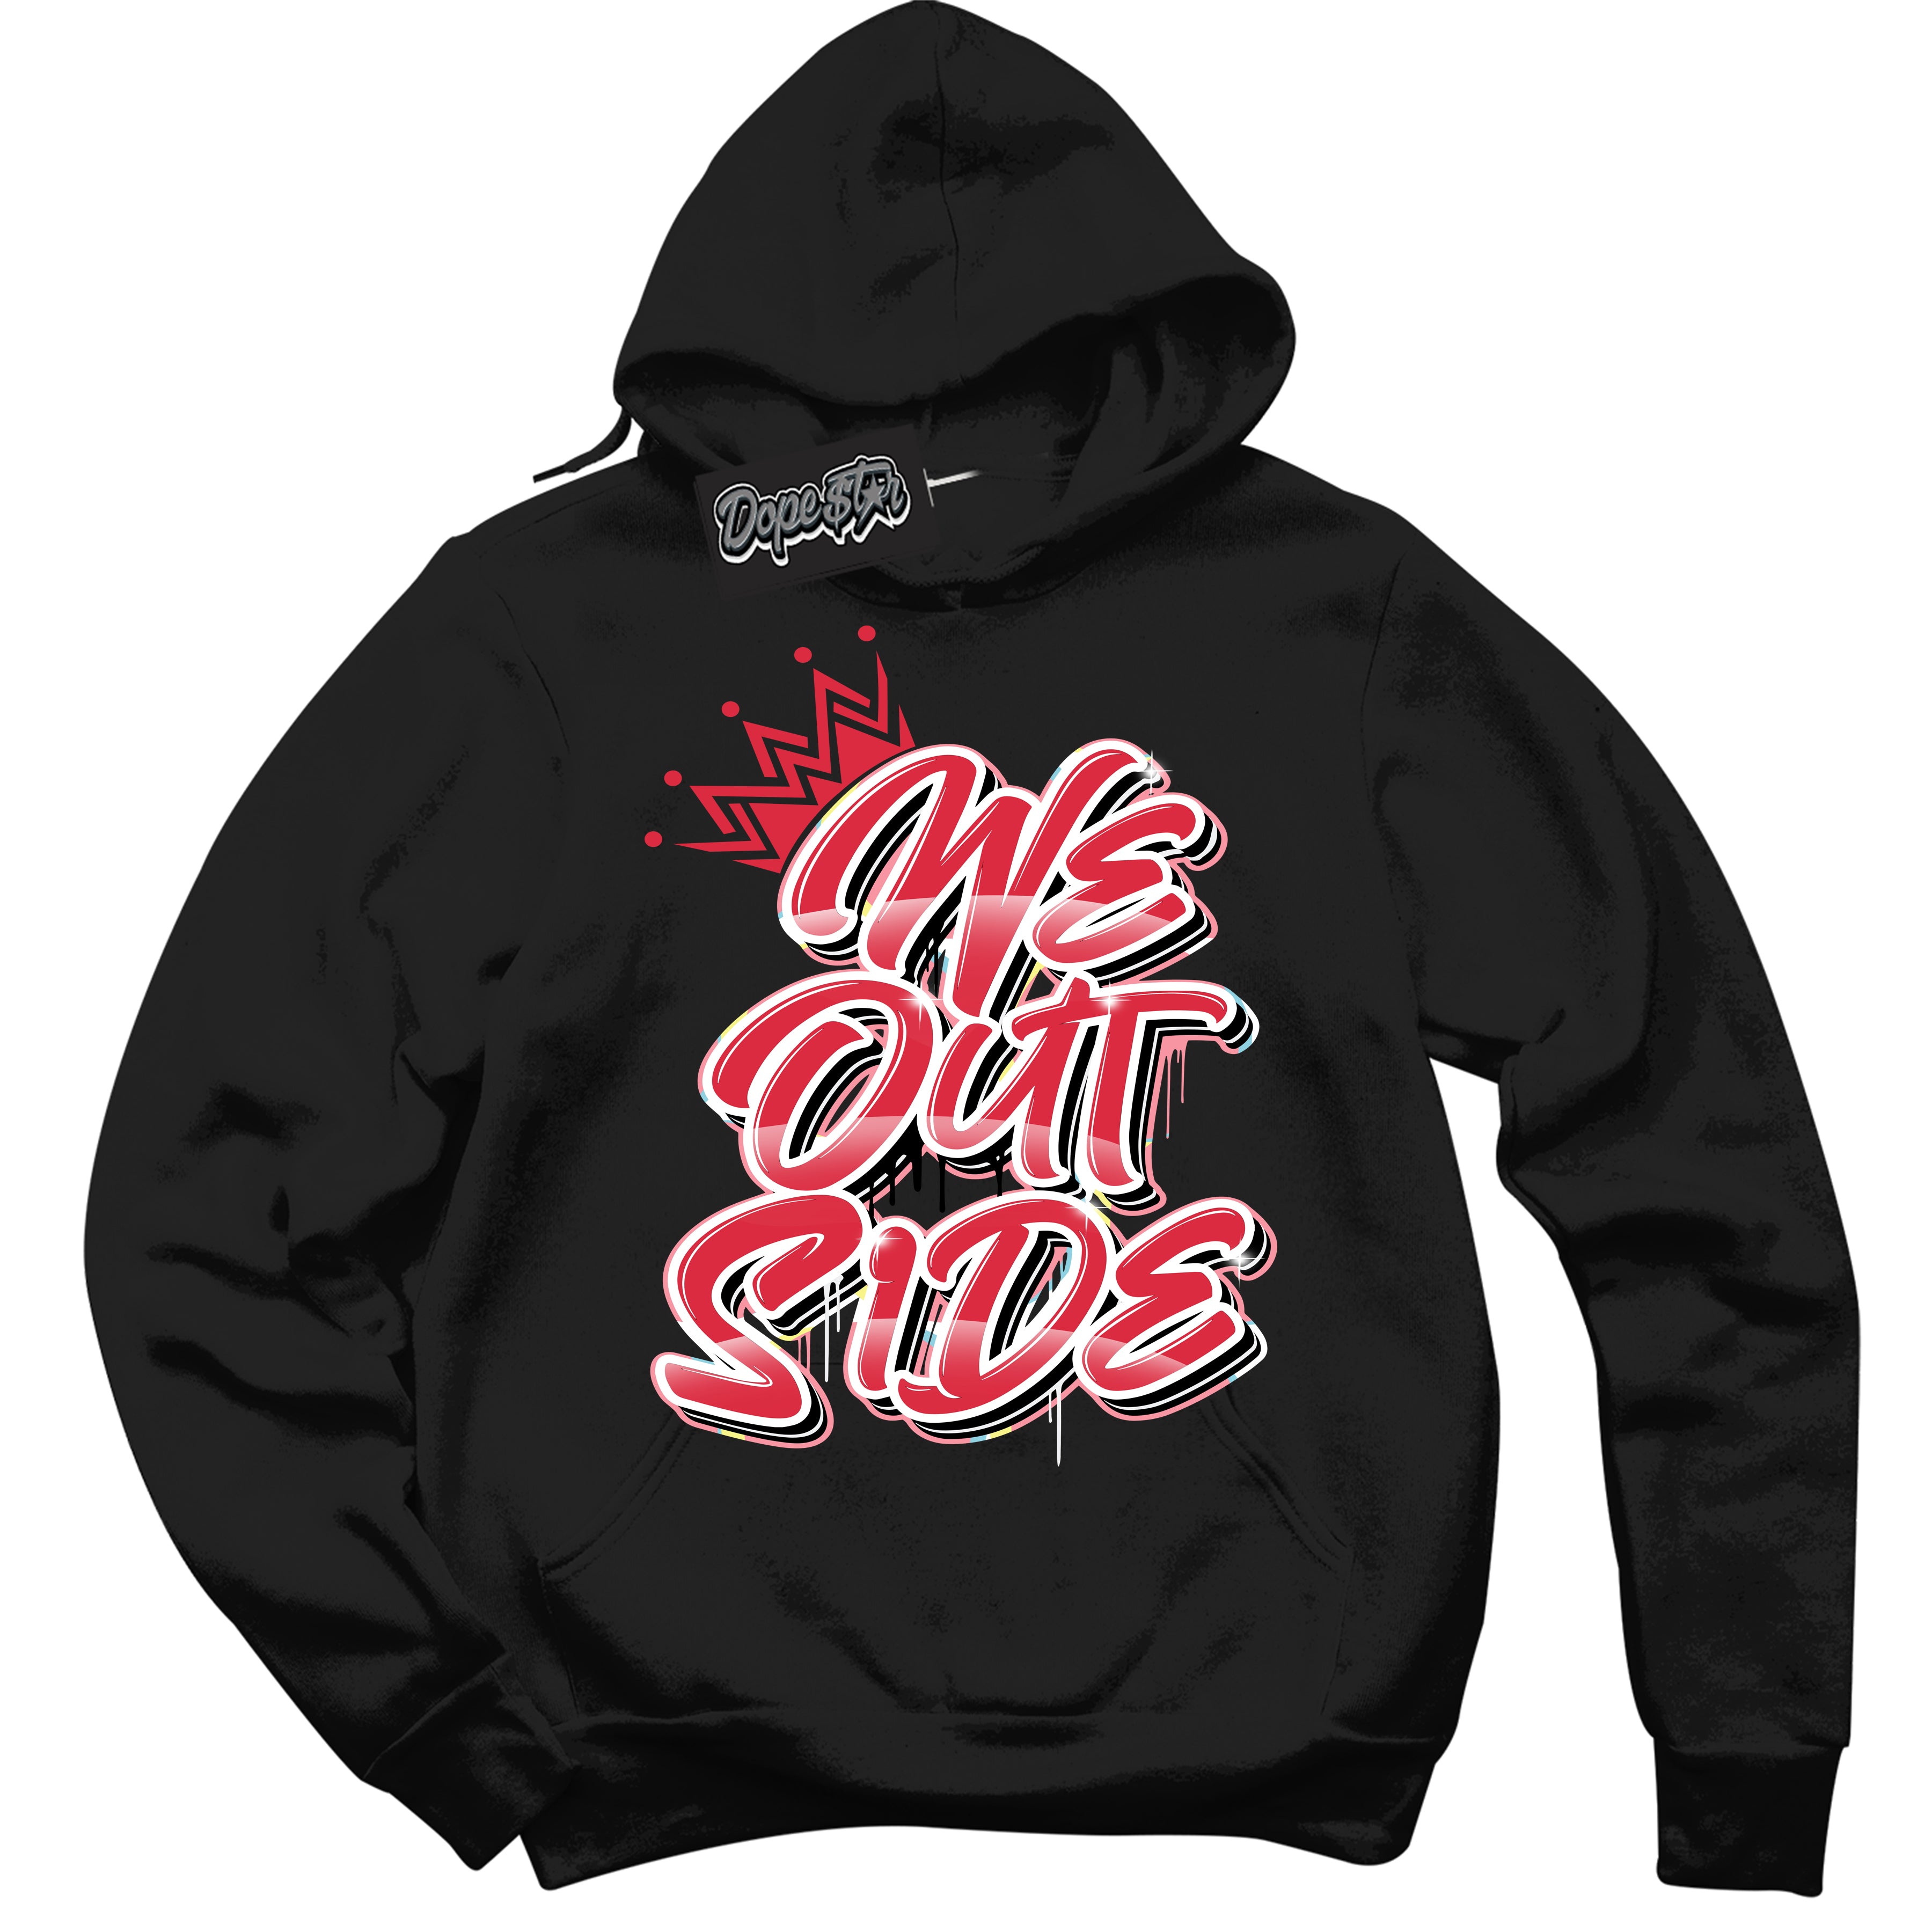 Cool Black Graphic DopeStar Hoodie with “ We Outside “ print, that perfectly matches Spider-Verse 1s sneakers